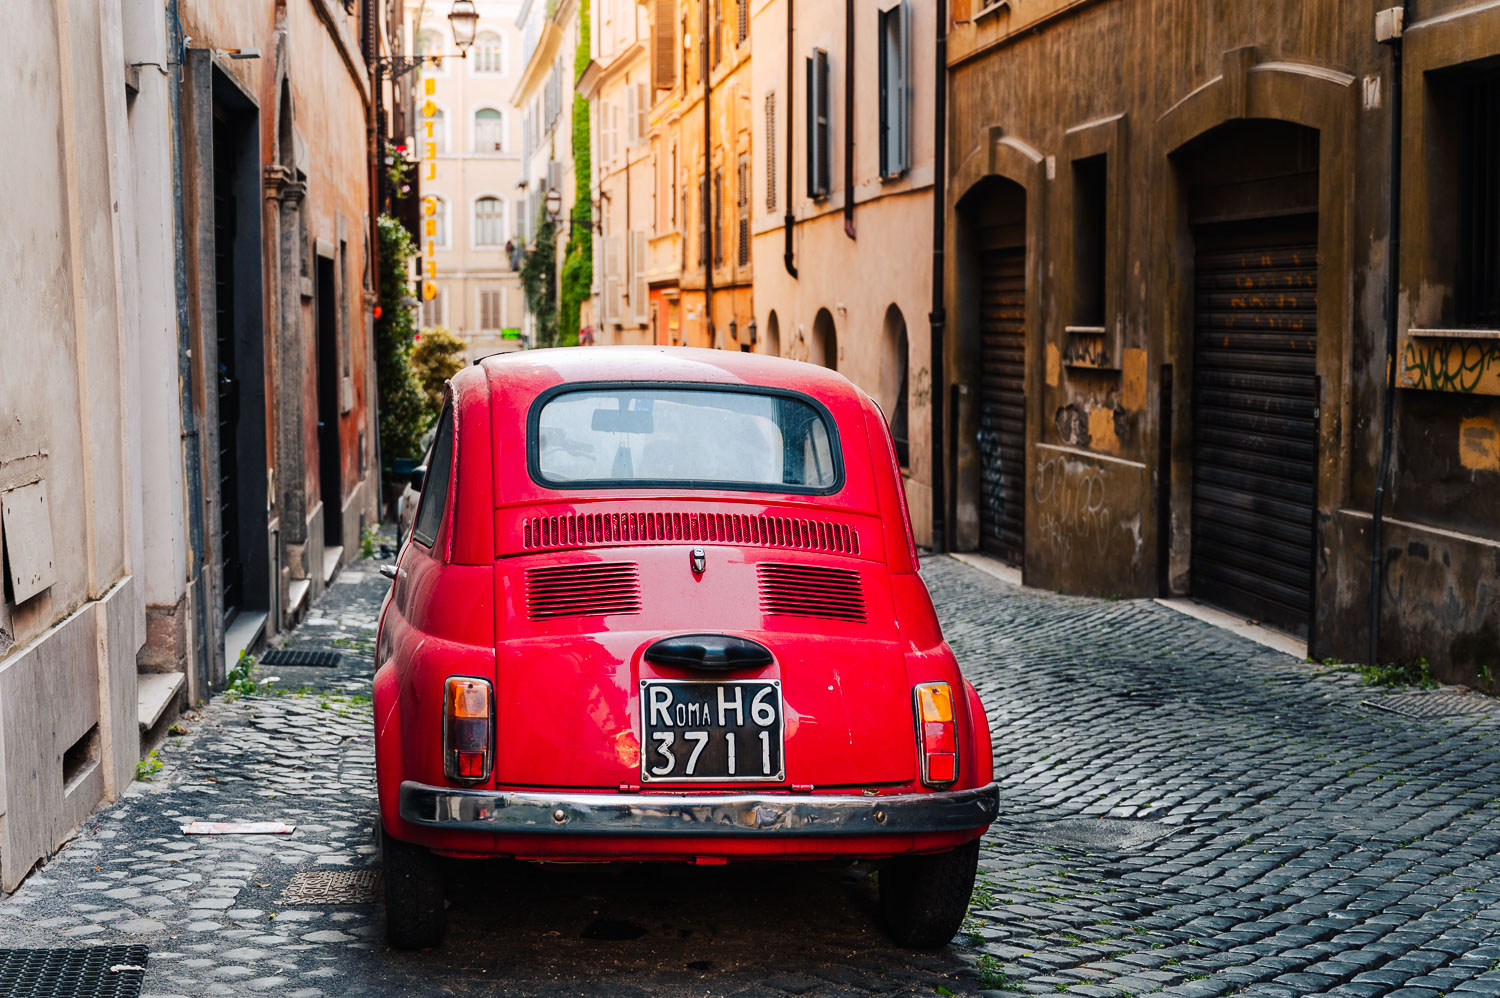 Red Fiat 500 vintage car in Monti neighbourhood in Rome, Italy